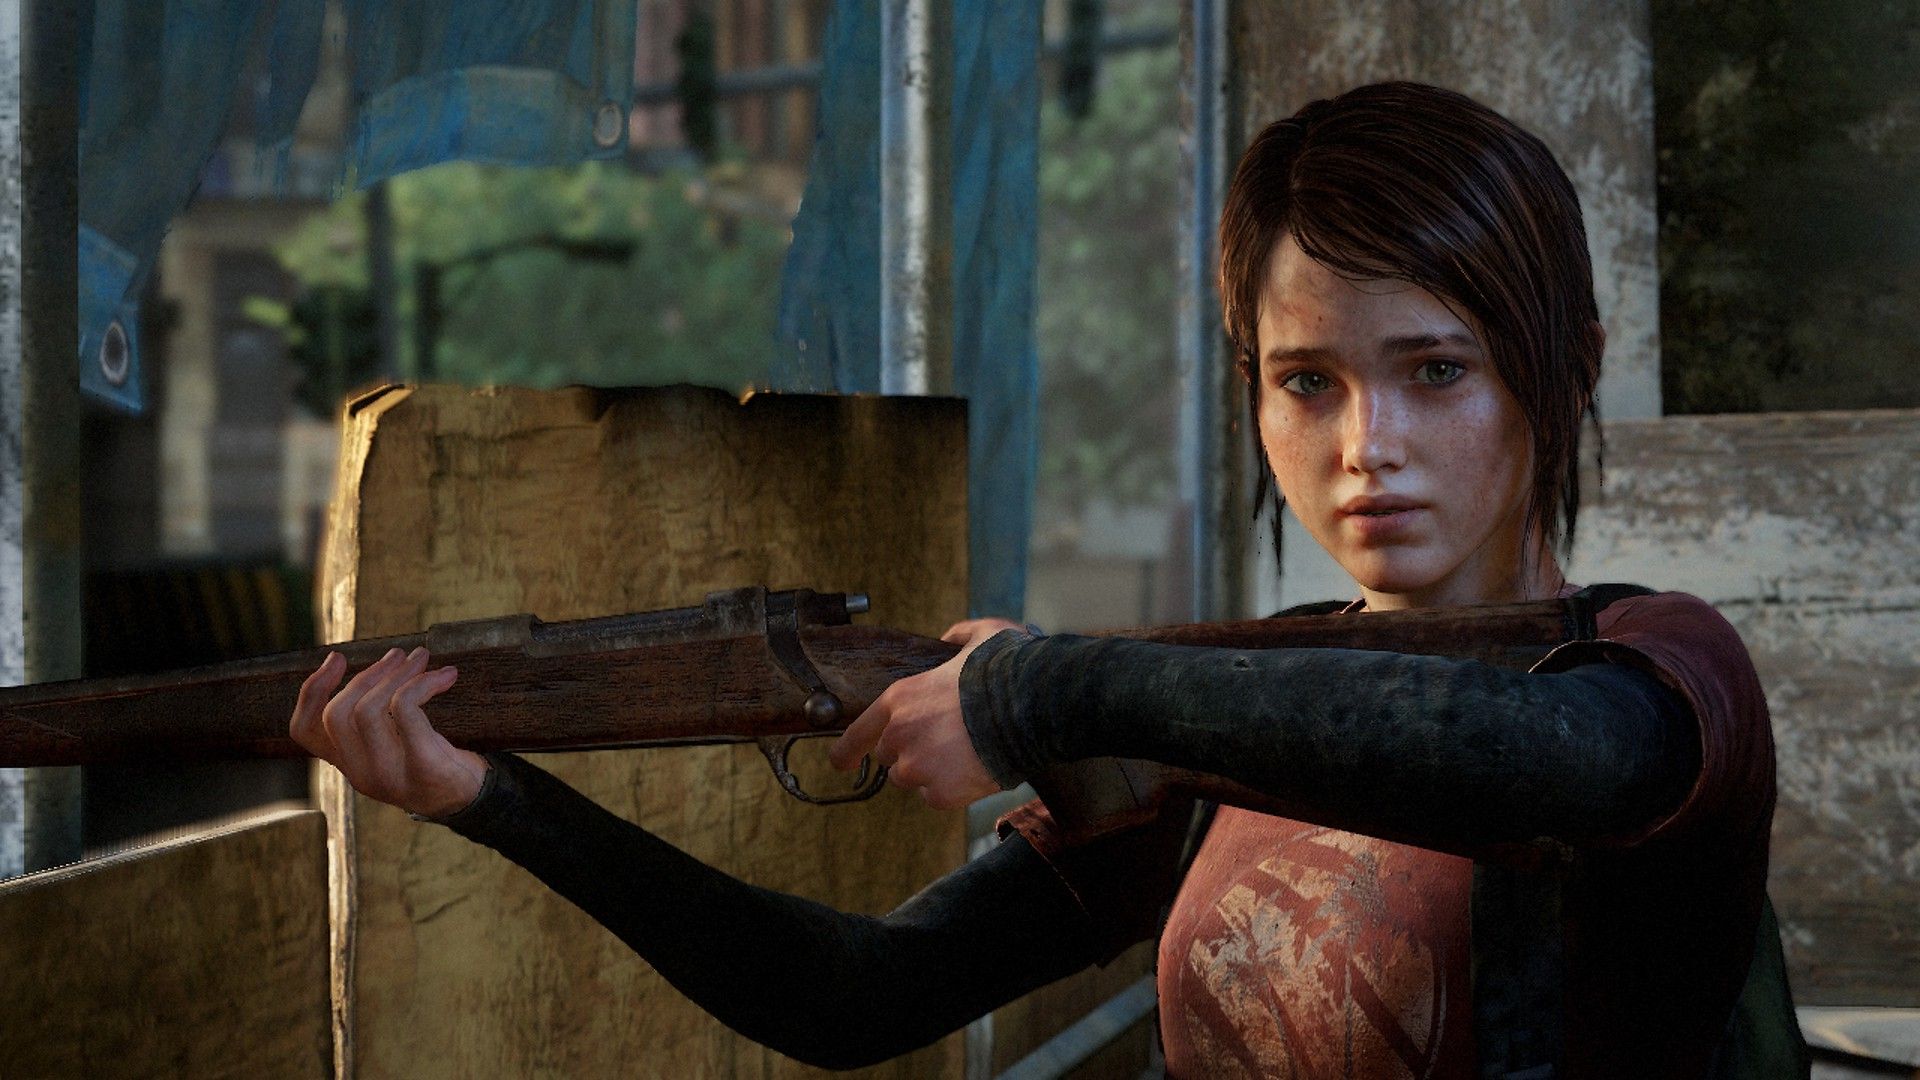 Ellie The Last Of Us Wallpapers Wallpaper Cave 